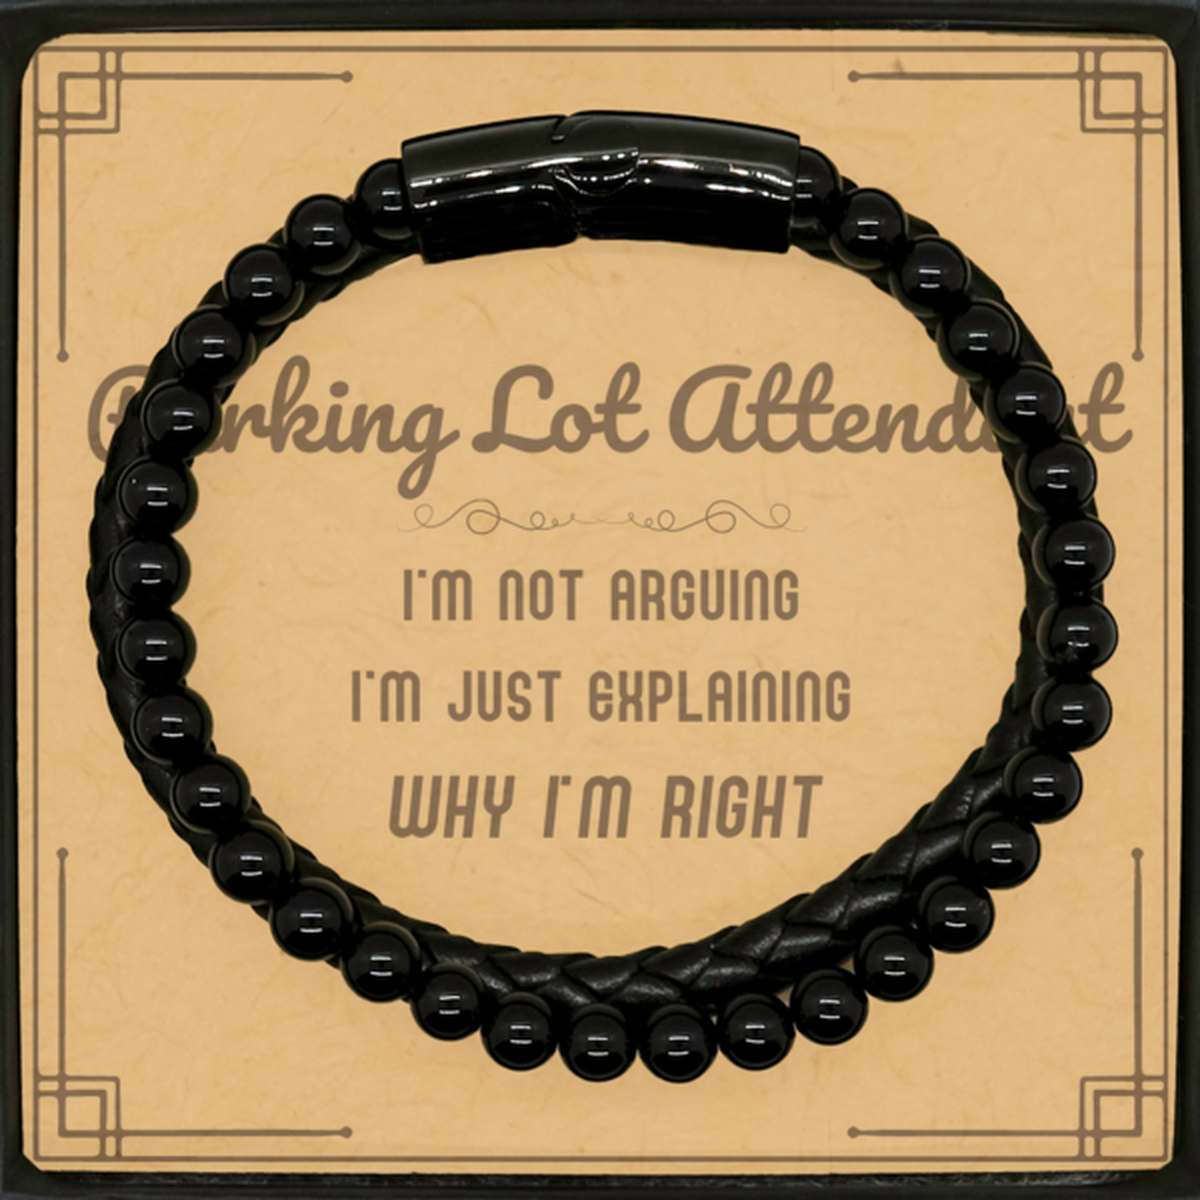 Parking Lot Attendant I'm not Arguing. I'm Just Explaining Why I'm RIGHT Stone Leather Bracelets, Funny Saying Quote Parking Lot Attendant Gifts For Parking Lot Attendant Message Card Graduation Birthday Christmas Gifts for Men Women Coworker